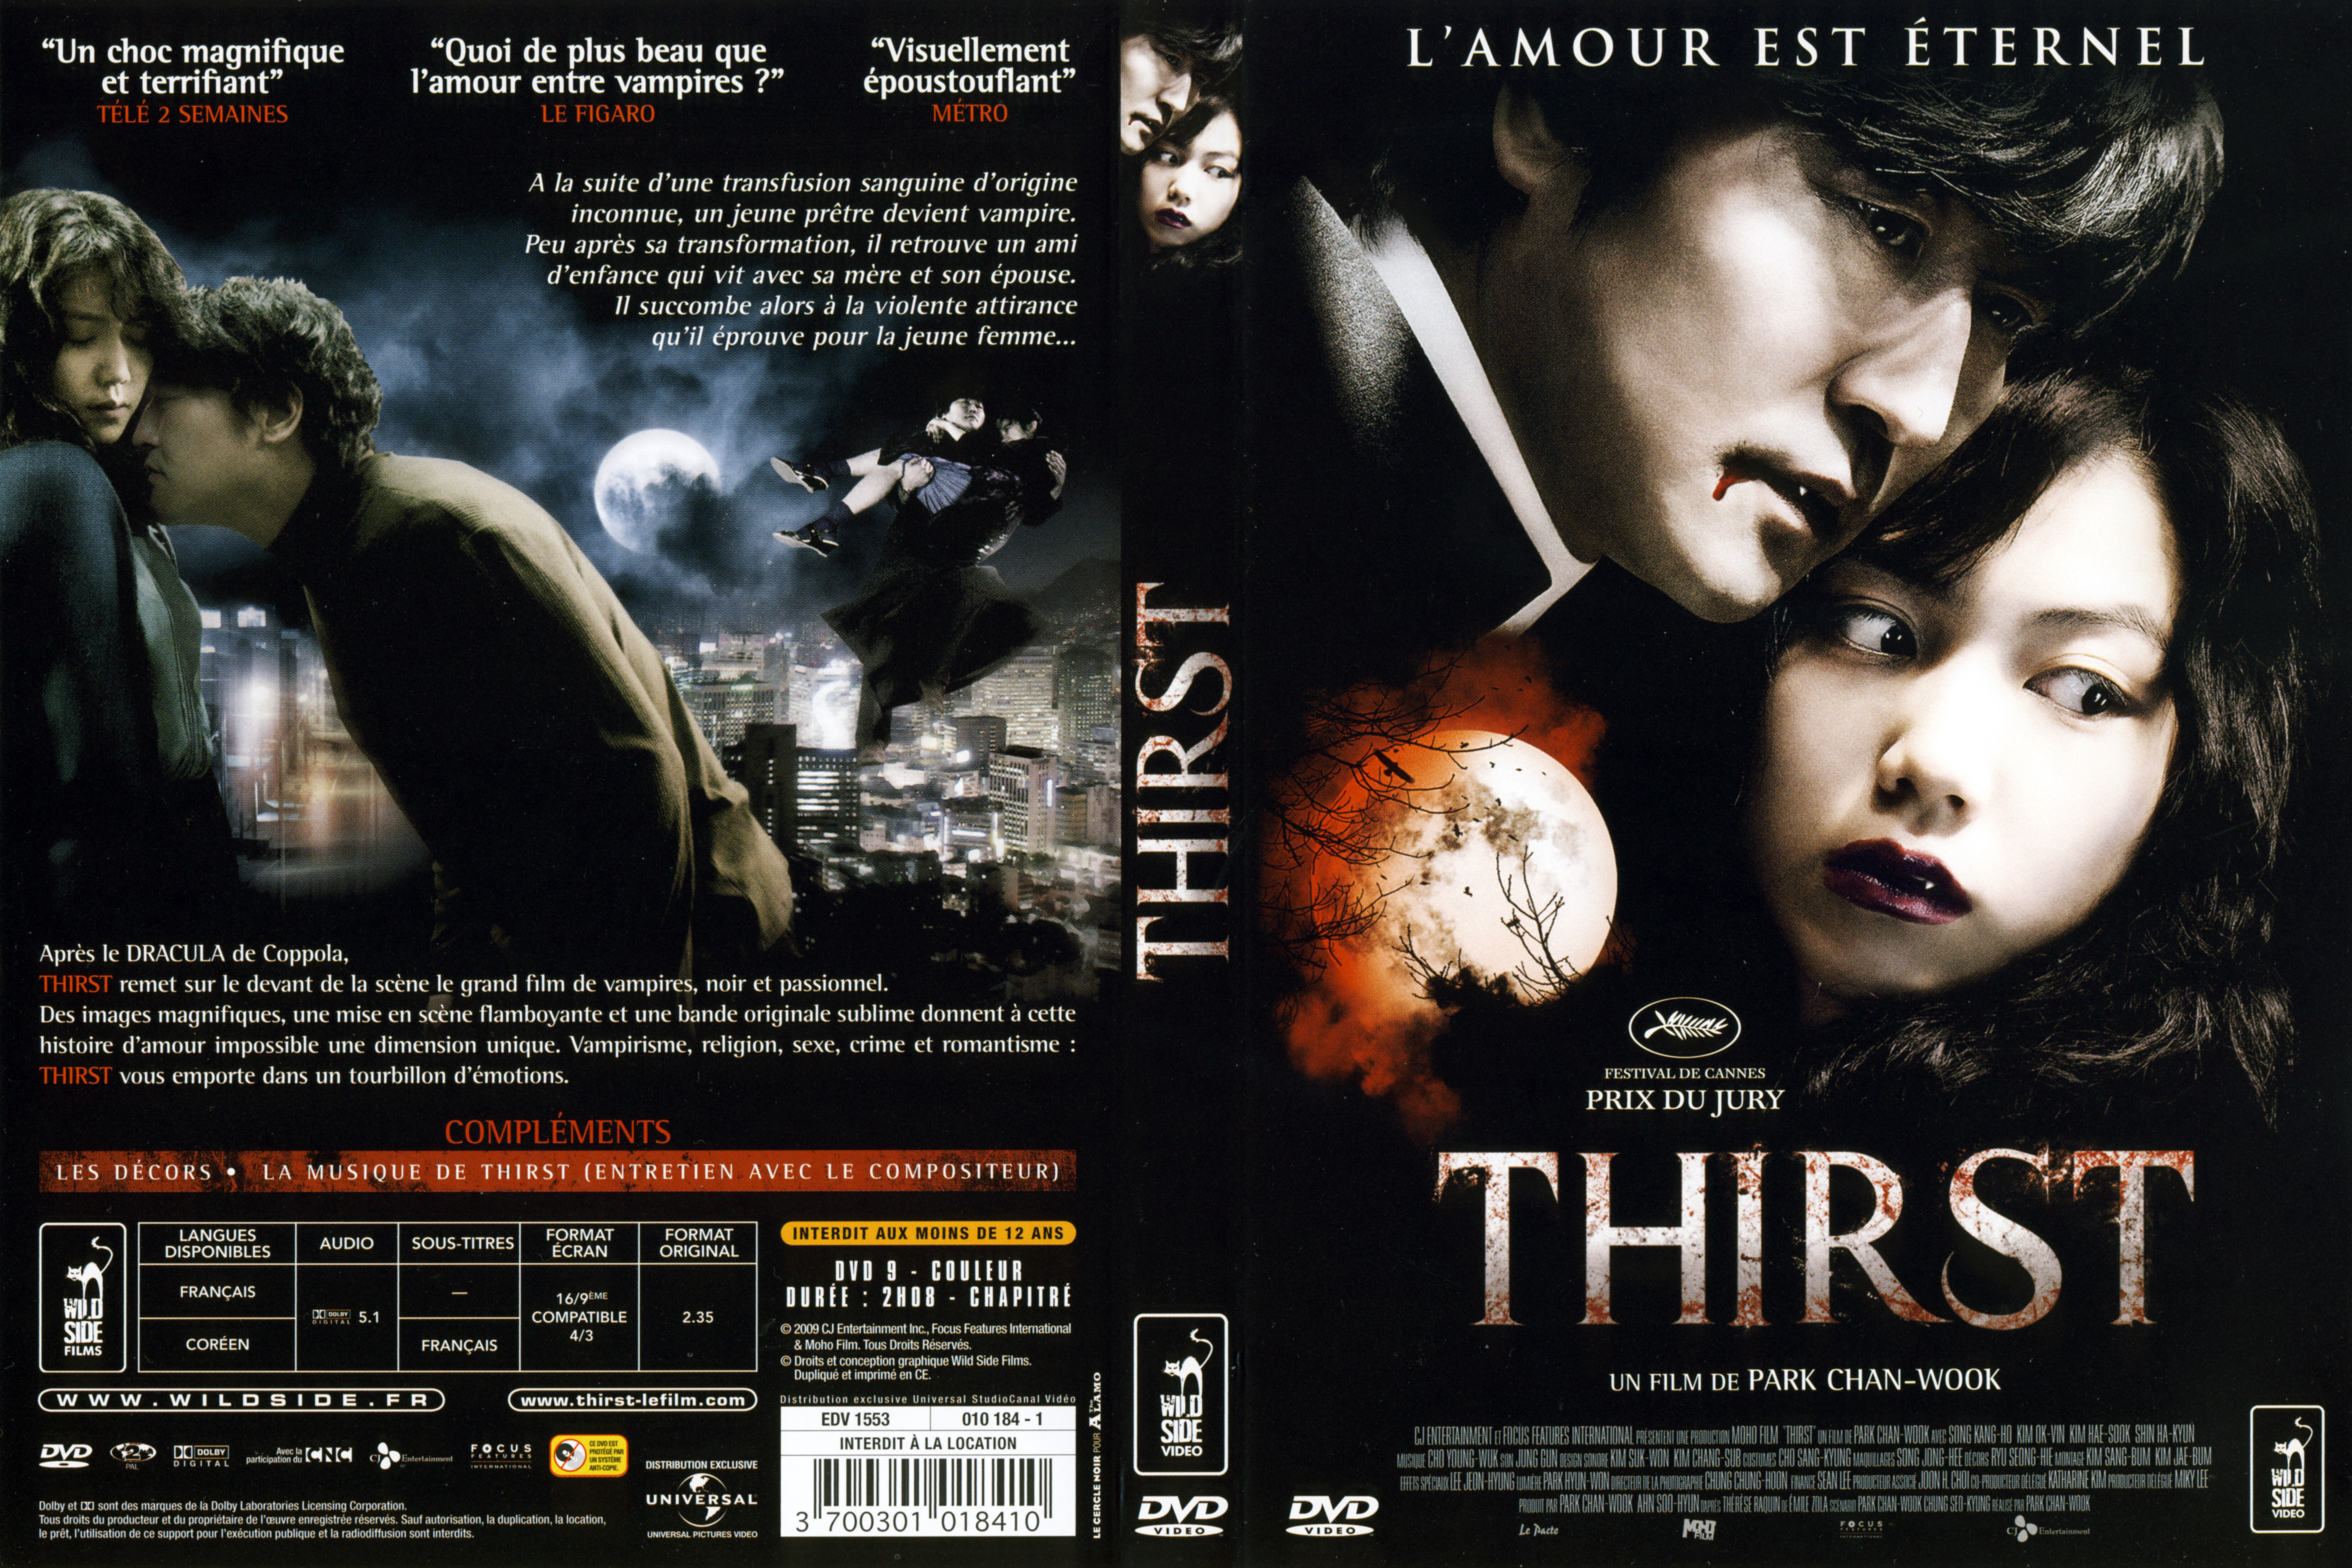 Jaquette DVD Thirst